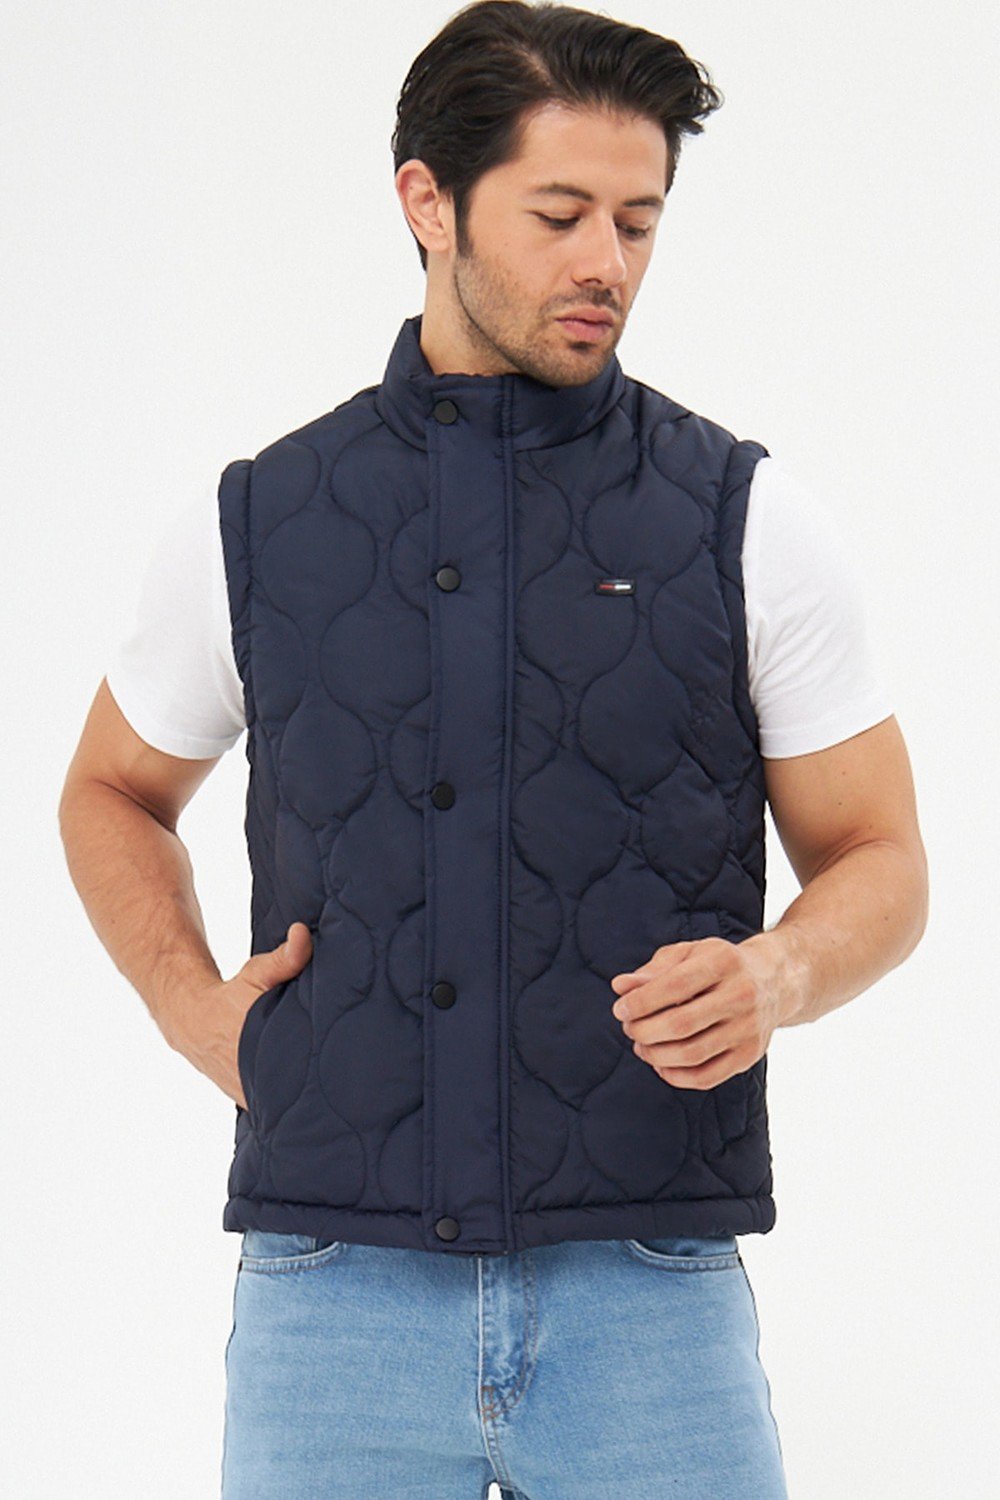 D1fference Men's Waterproof And Windproof Onion Pattern Quilted Navy Blue Vest.